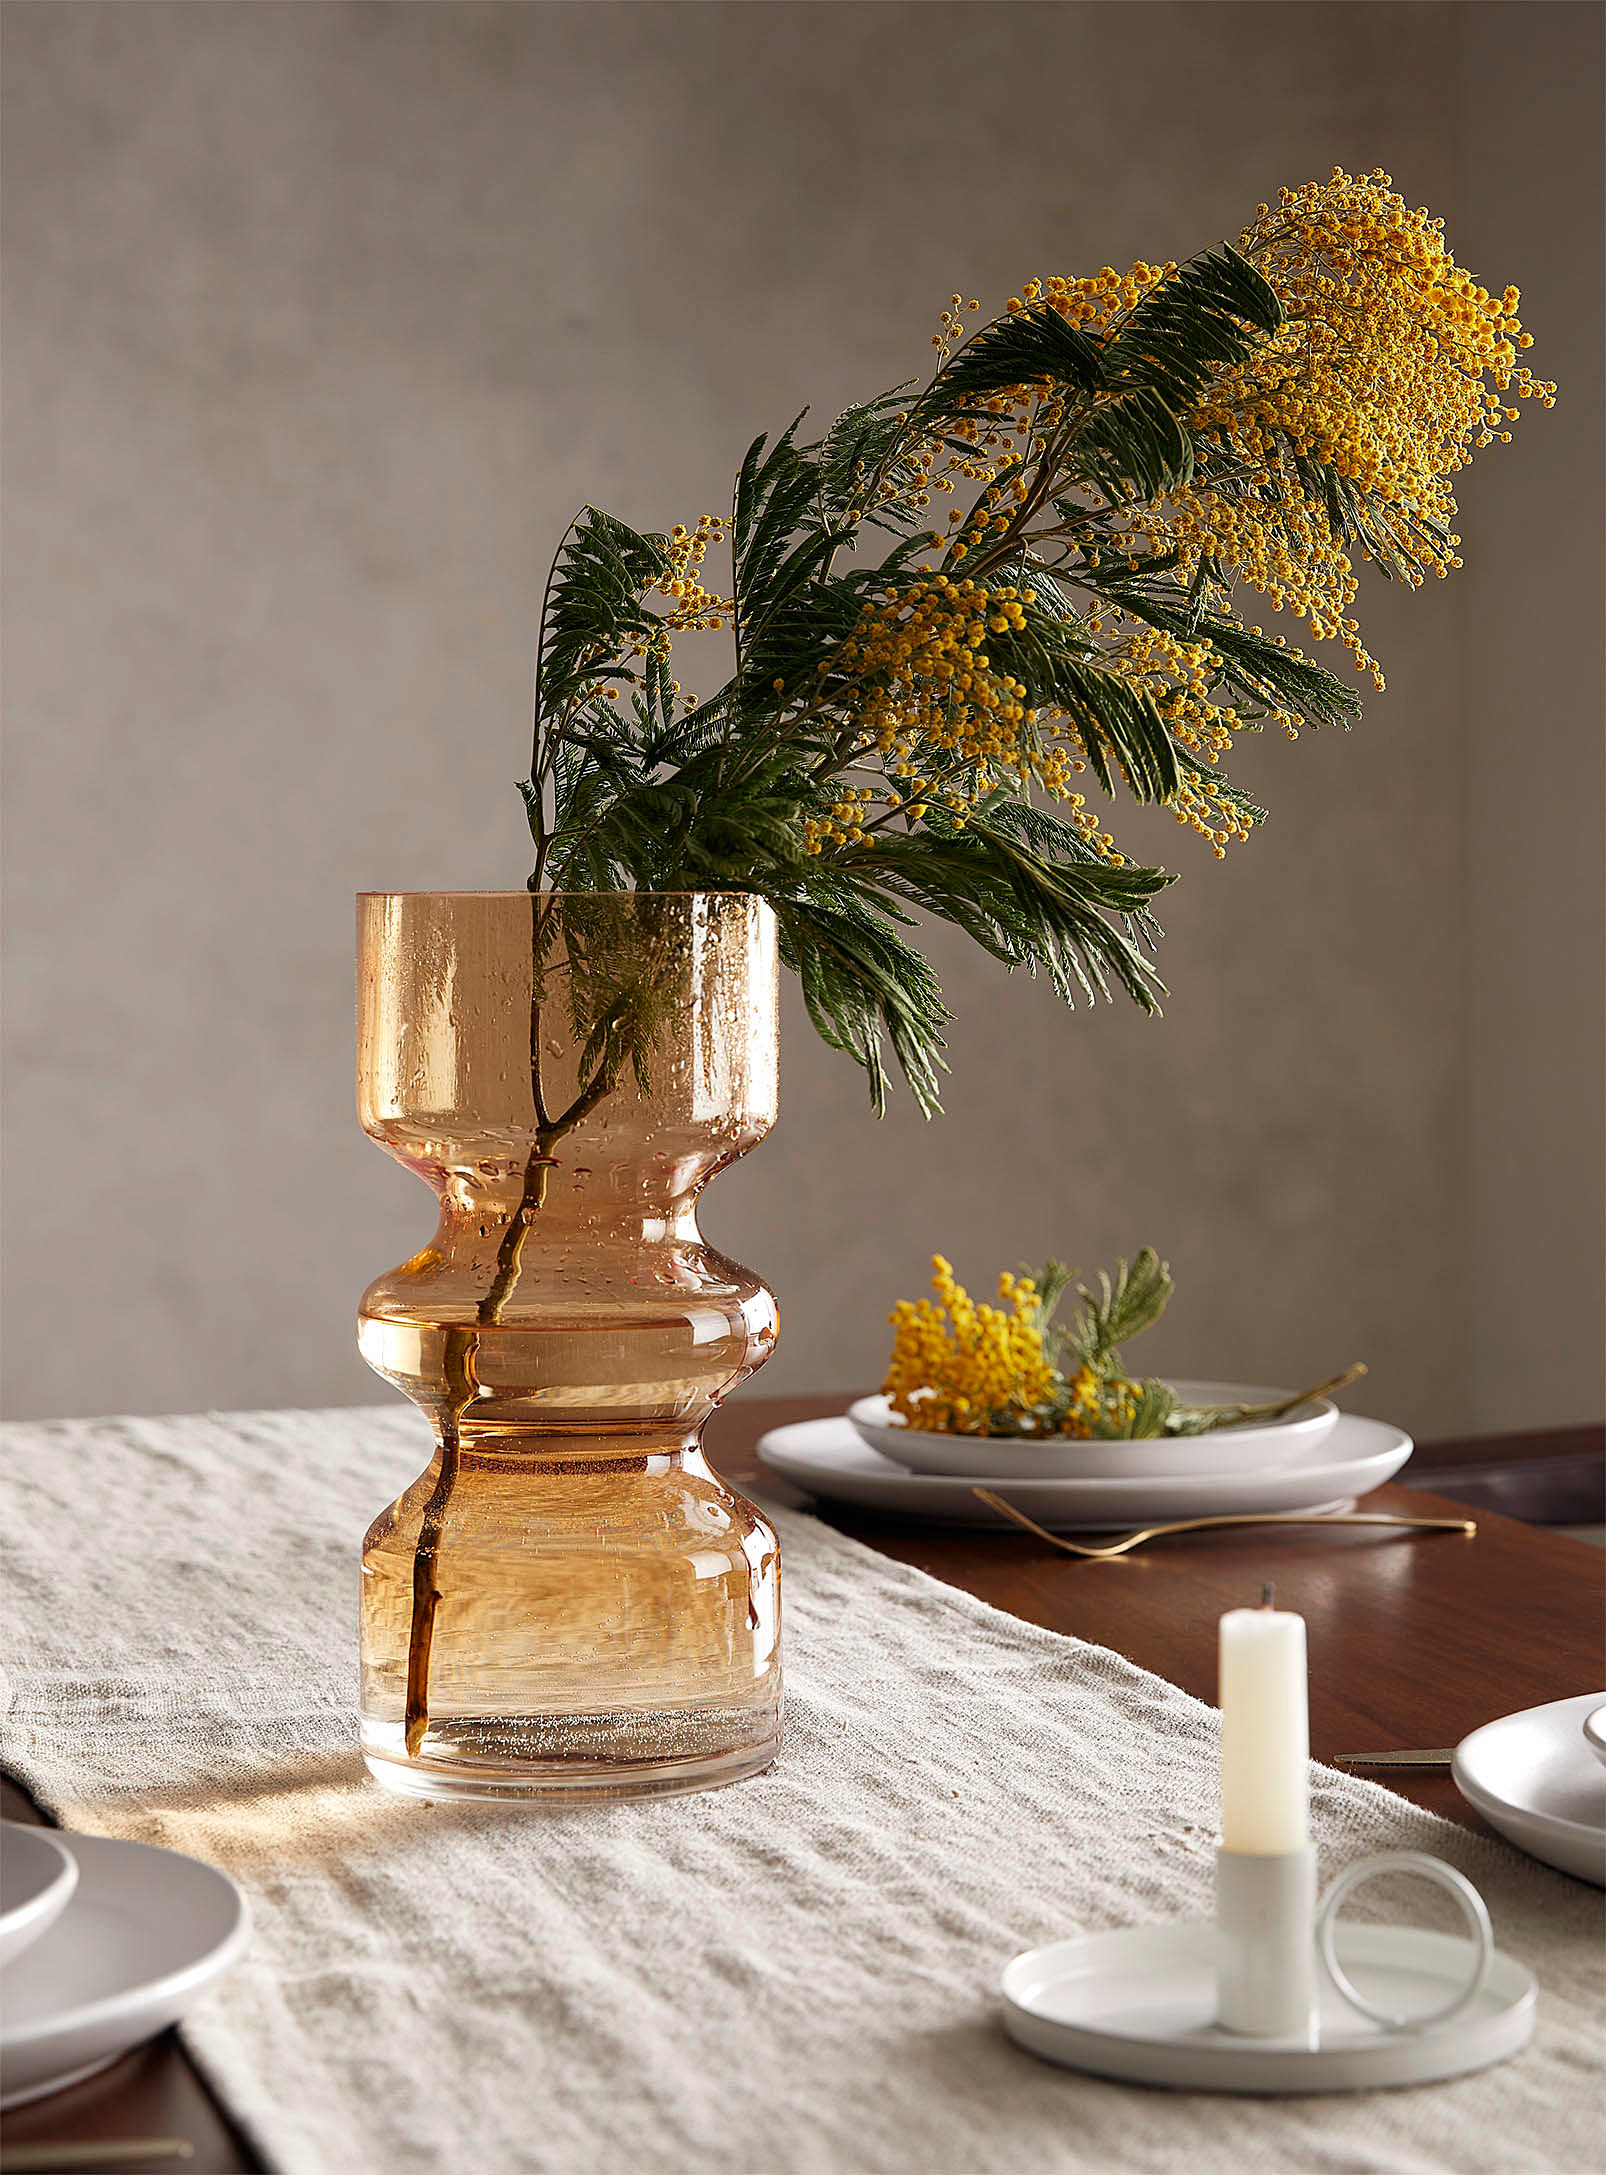 a cute vase with a branch in it on a cozy table